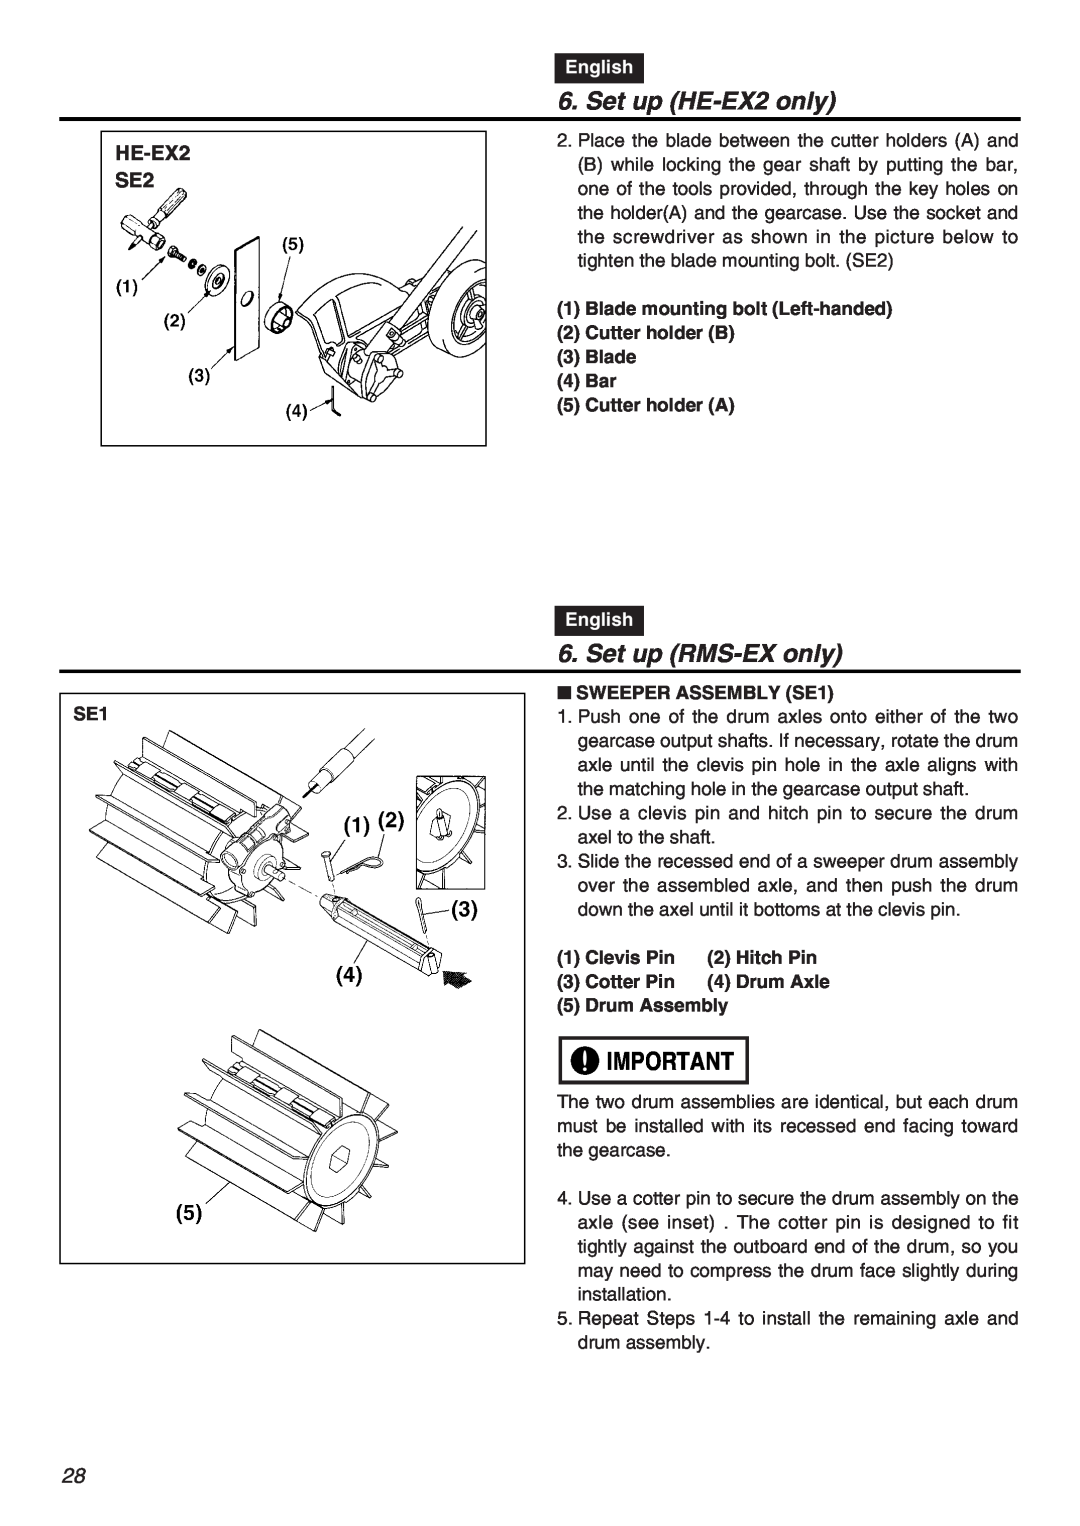 RedMax EXZ2401S-PH-CA manual Set up RMS-EX only, HE-EX2 SE2, Set up HE-EX2 only, English 